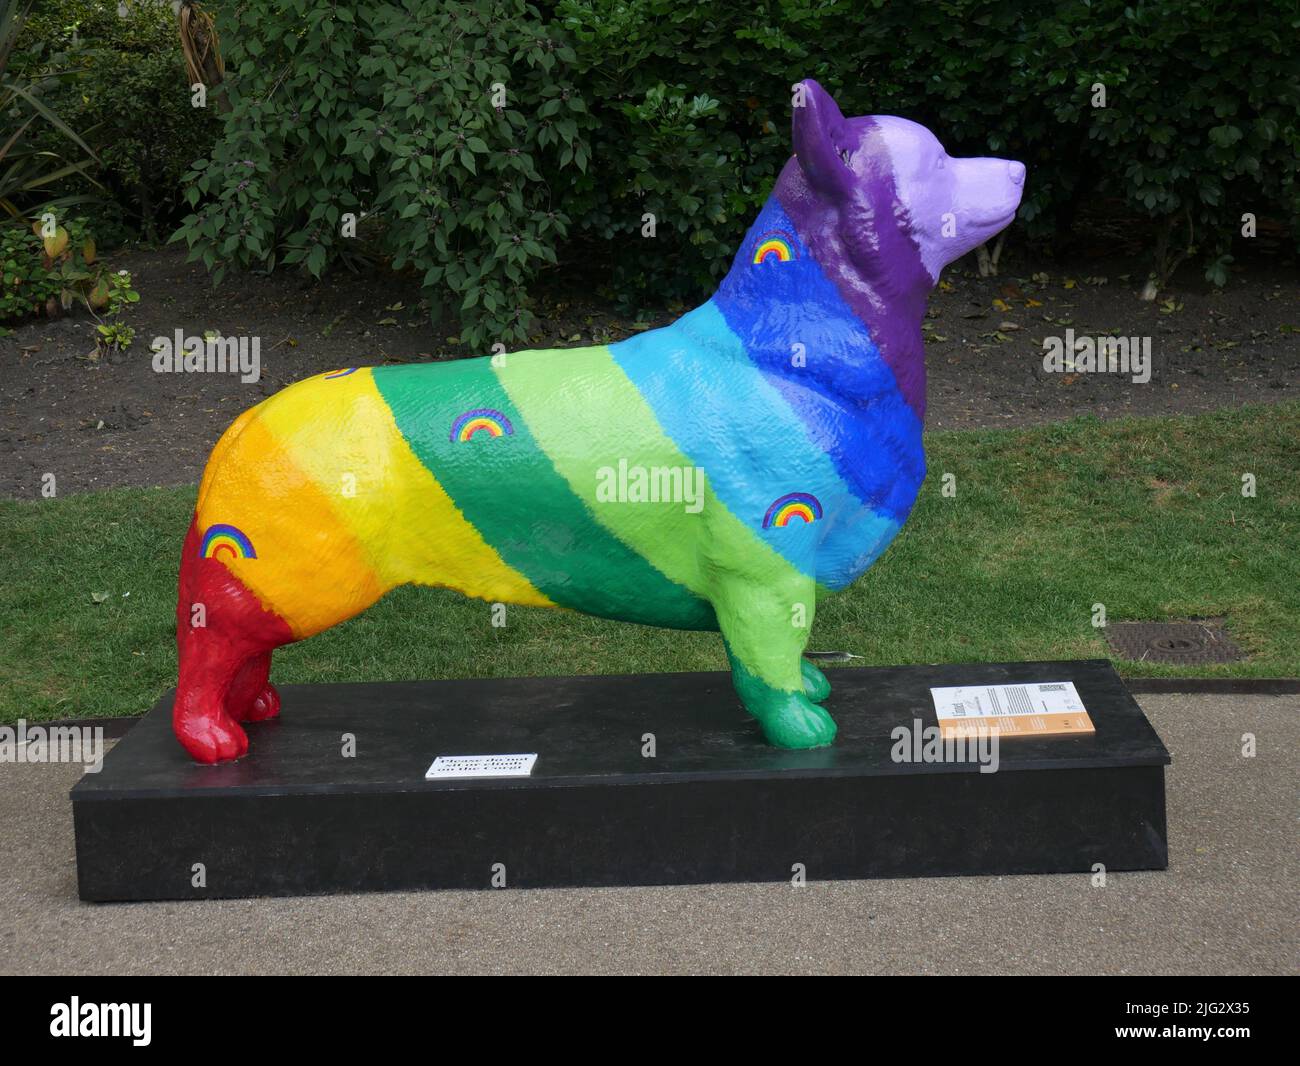 Rainbow corgi,  For The Queen's Platinum Jubilee, 19 statues of Corgis. The Queen's favourite breed of dog have been placed around London Stock Photo